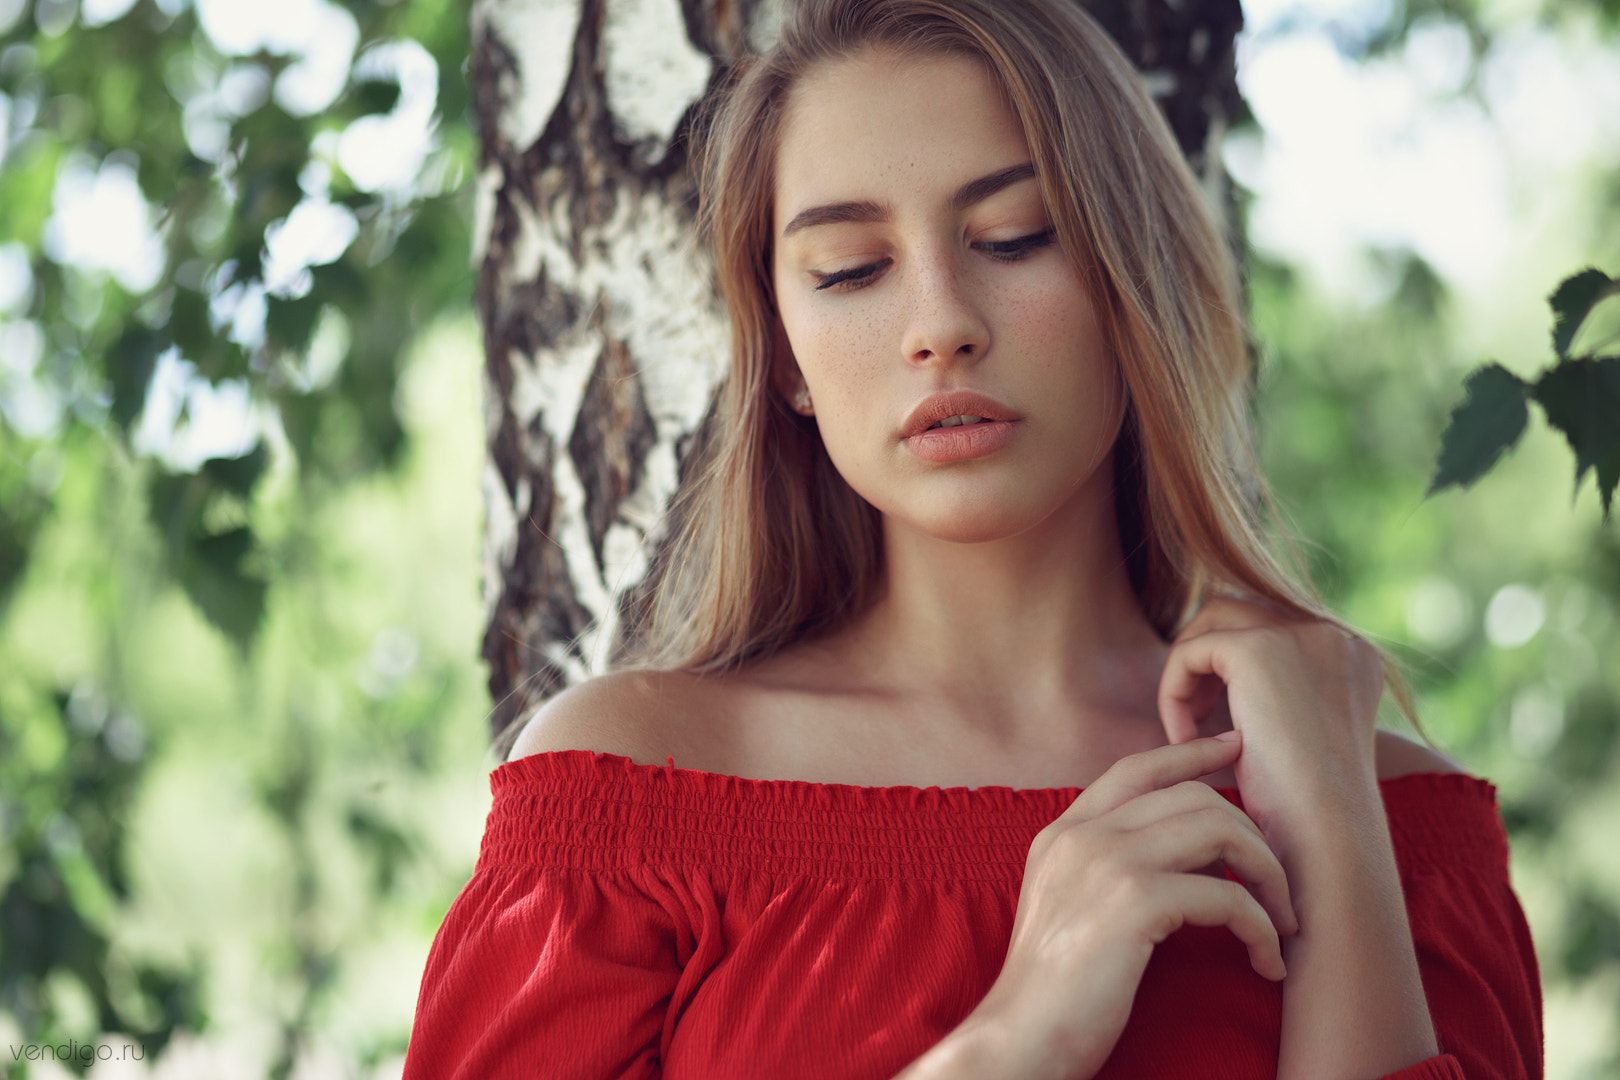 People 1620x1080 women blonde portrait bare shoulders trees freckles closed eyes strapless dress red tops Evgeniy Bulatov Anna women outdoors outdoors red clothing model